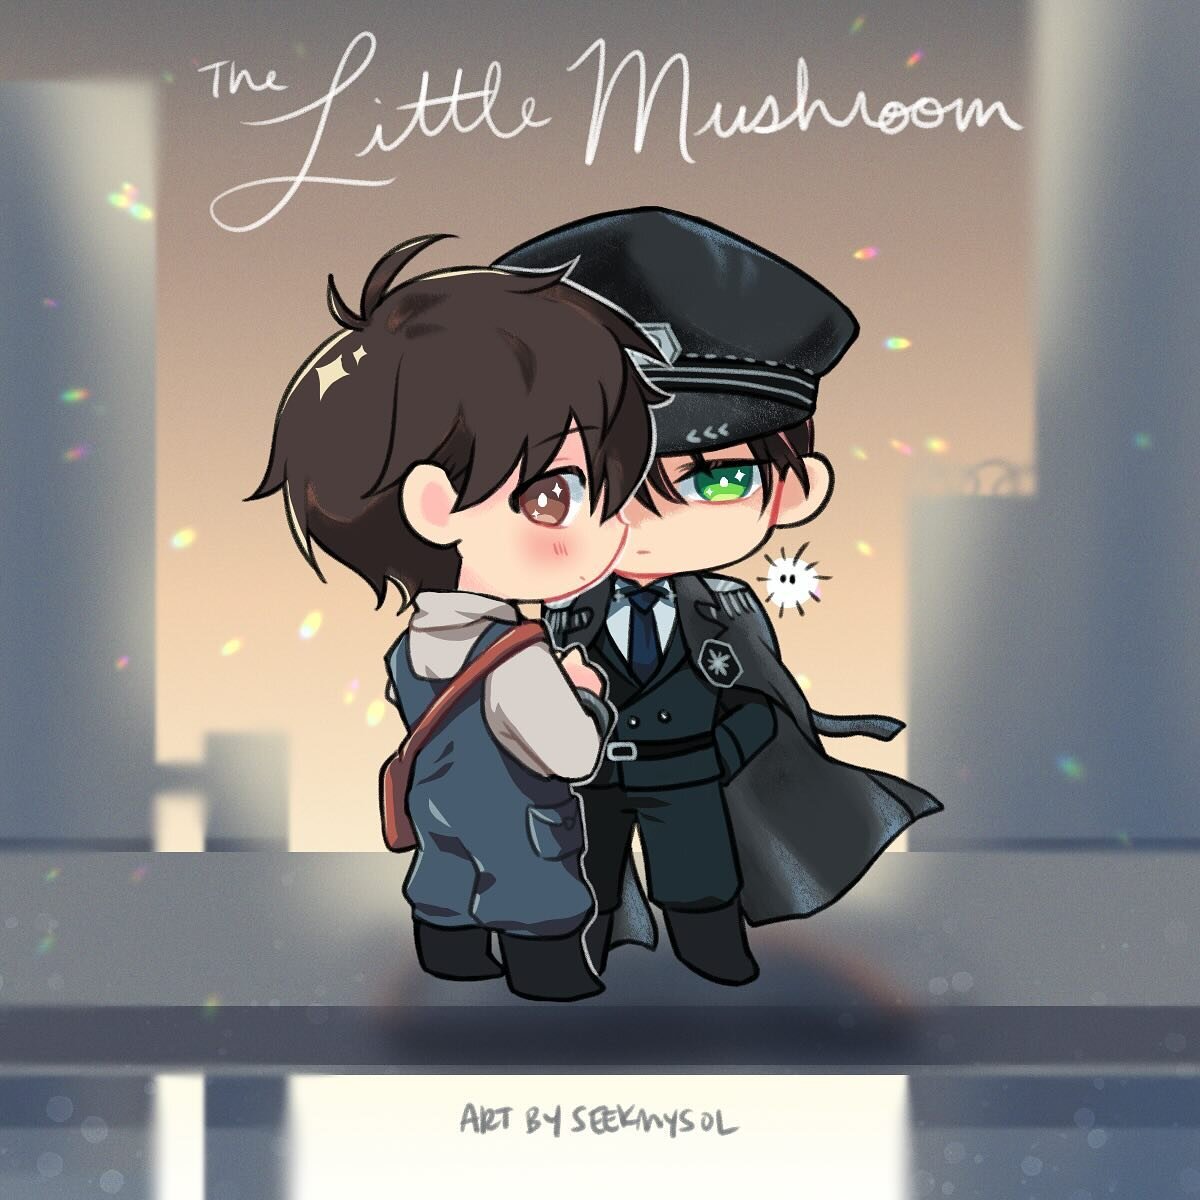 The Little Mushroom&hellip; and the THIEF! What makes you think you can just take things cuz they are cute, huh?!
.
.
.
#littlemushroom #anzhe #lufeng #bl #danmei